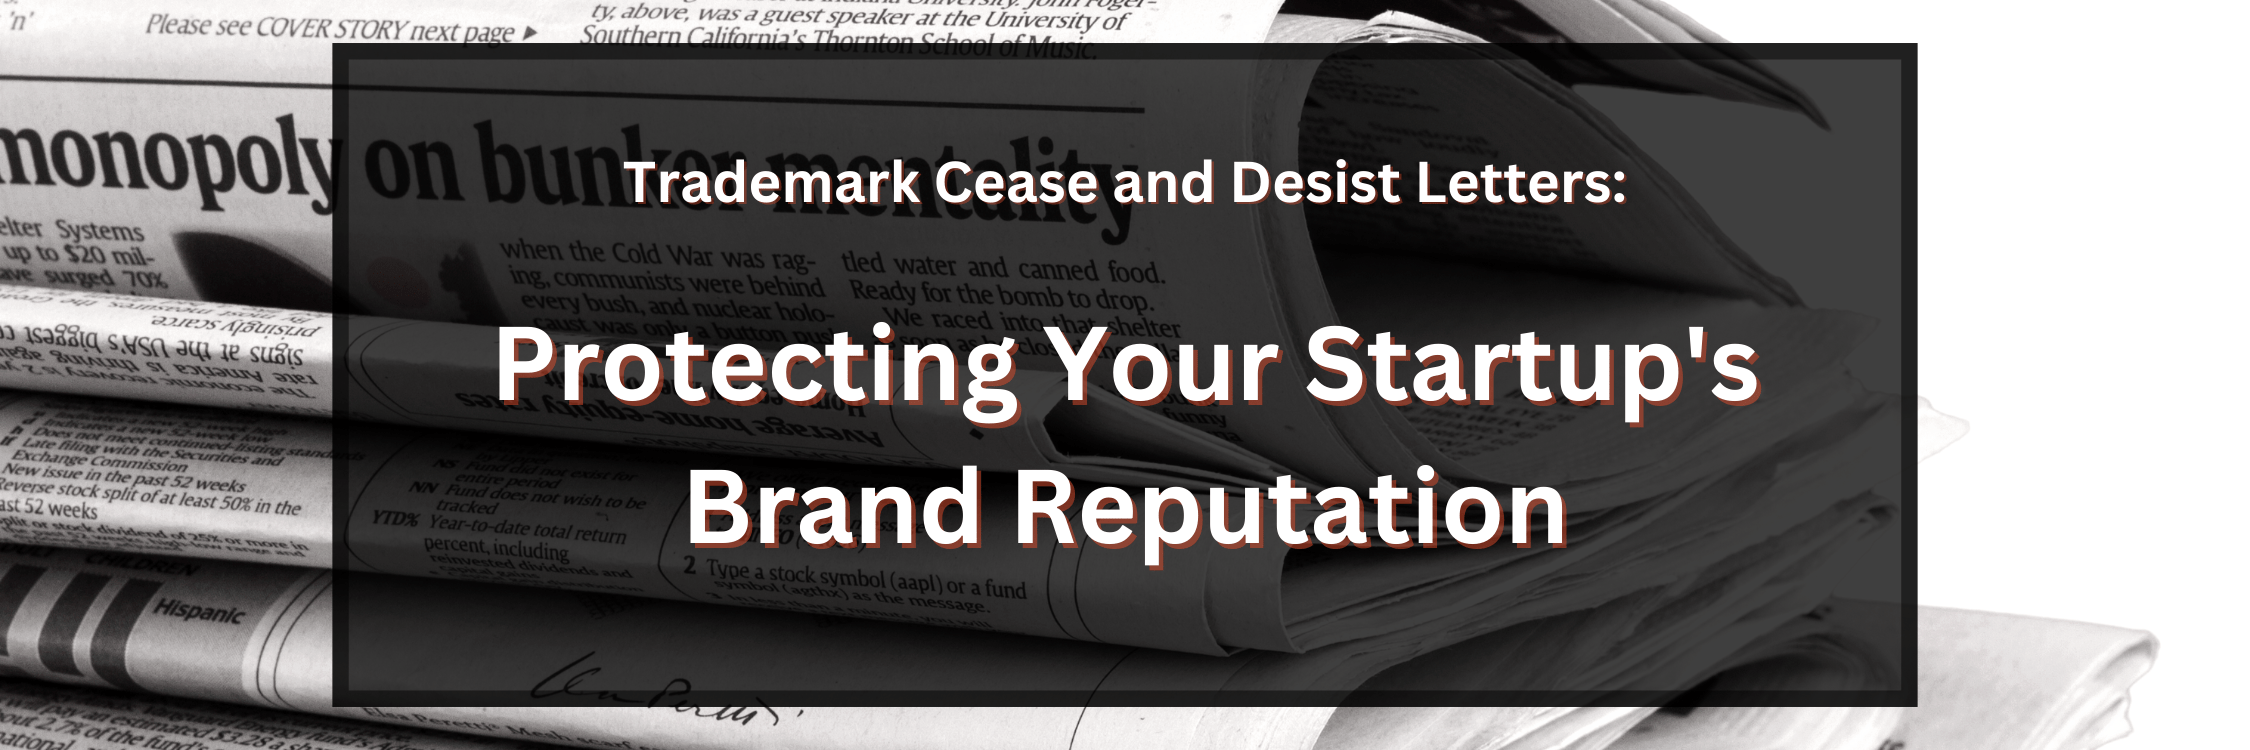 Trademark Cease and Desist Letters: Protecting Your Startup’s Brand Reputation